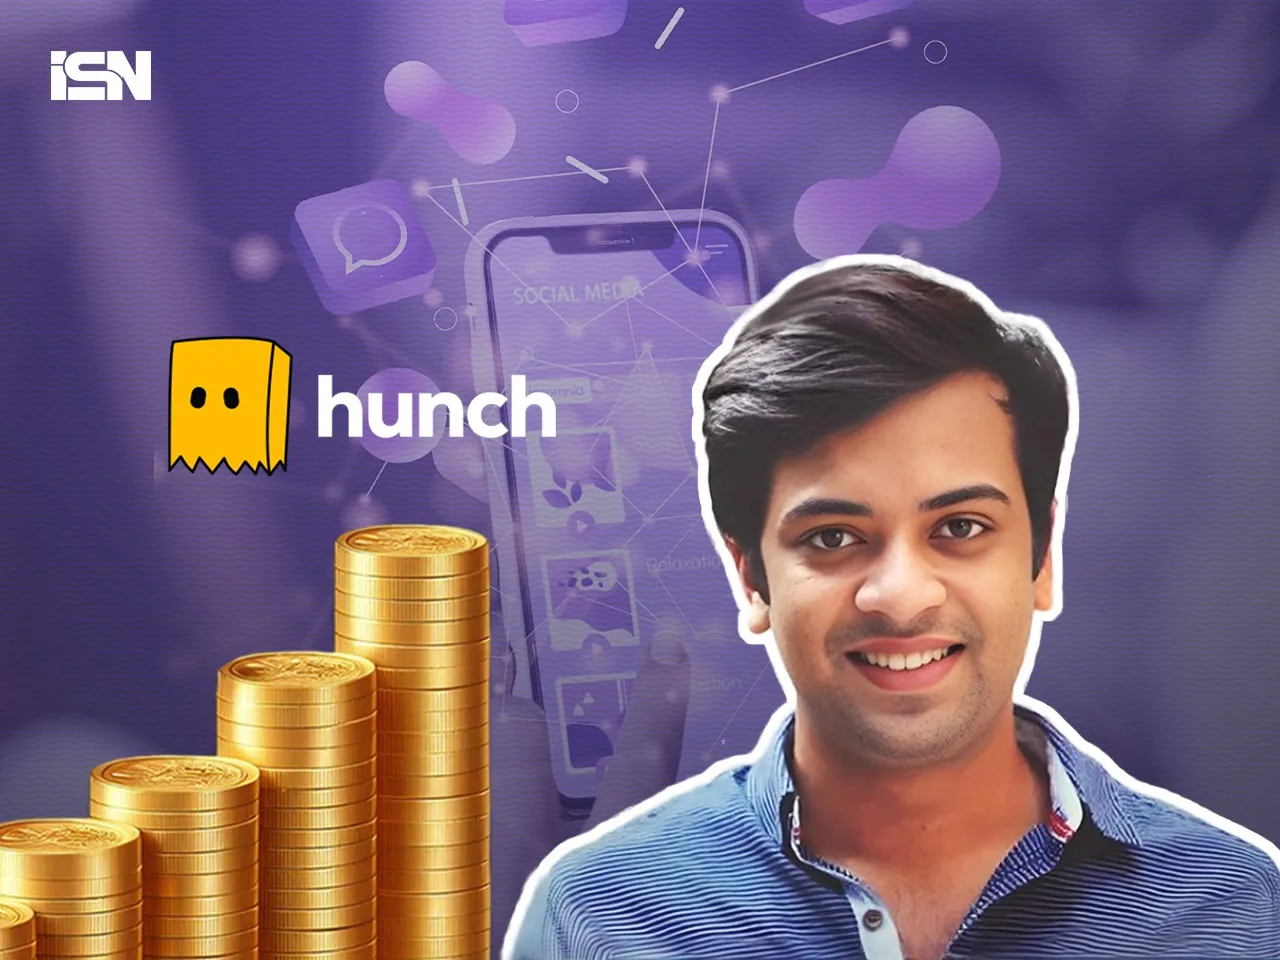 Social media startup Hunch raises $23M in a Series A round